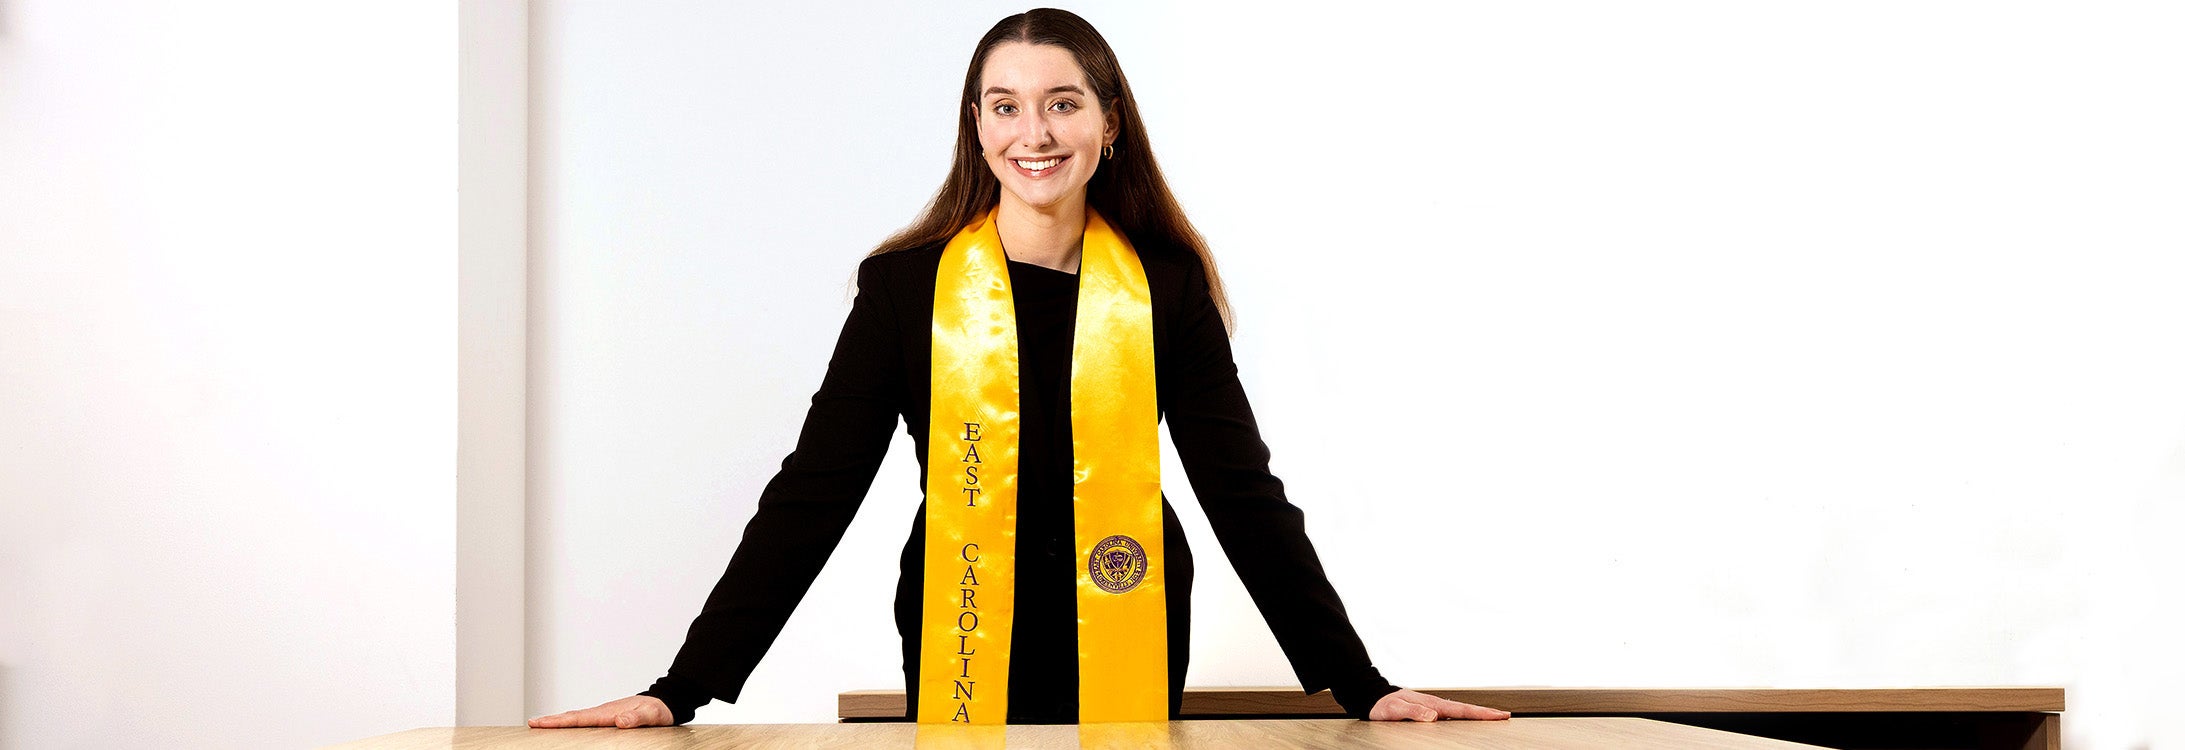 Jordan Anderson took in every opportunity offered to her through the College of Business and Honors College during her time at East Carolina University. (Photos by Rhett Butler)